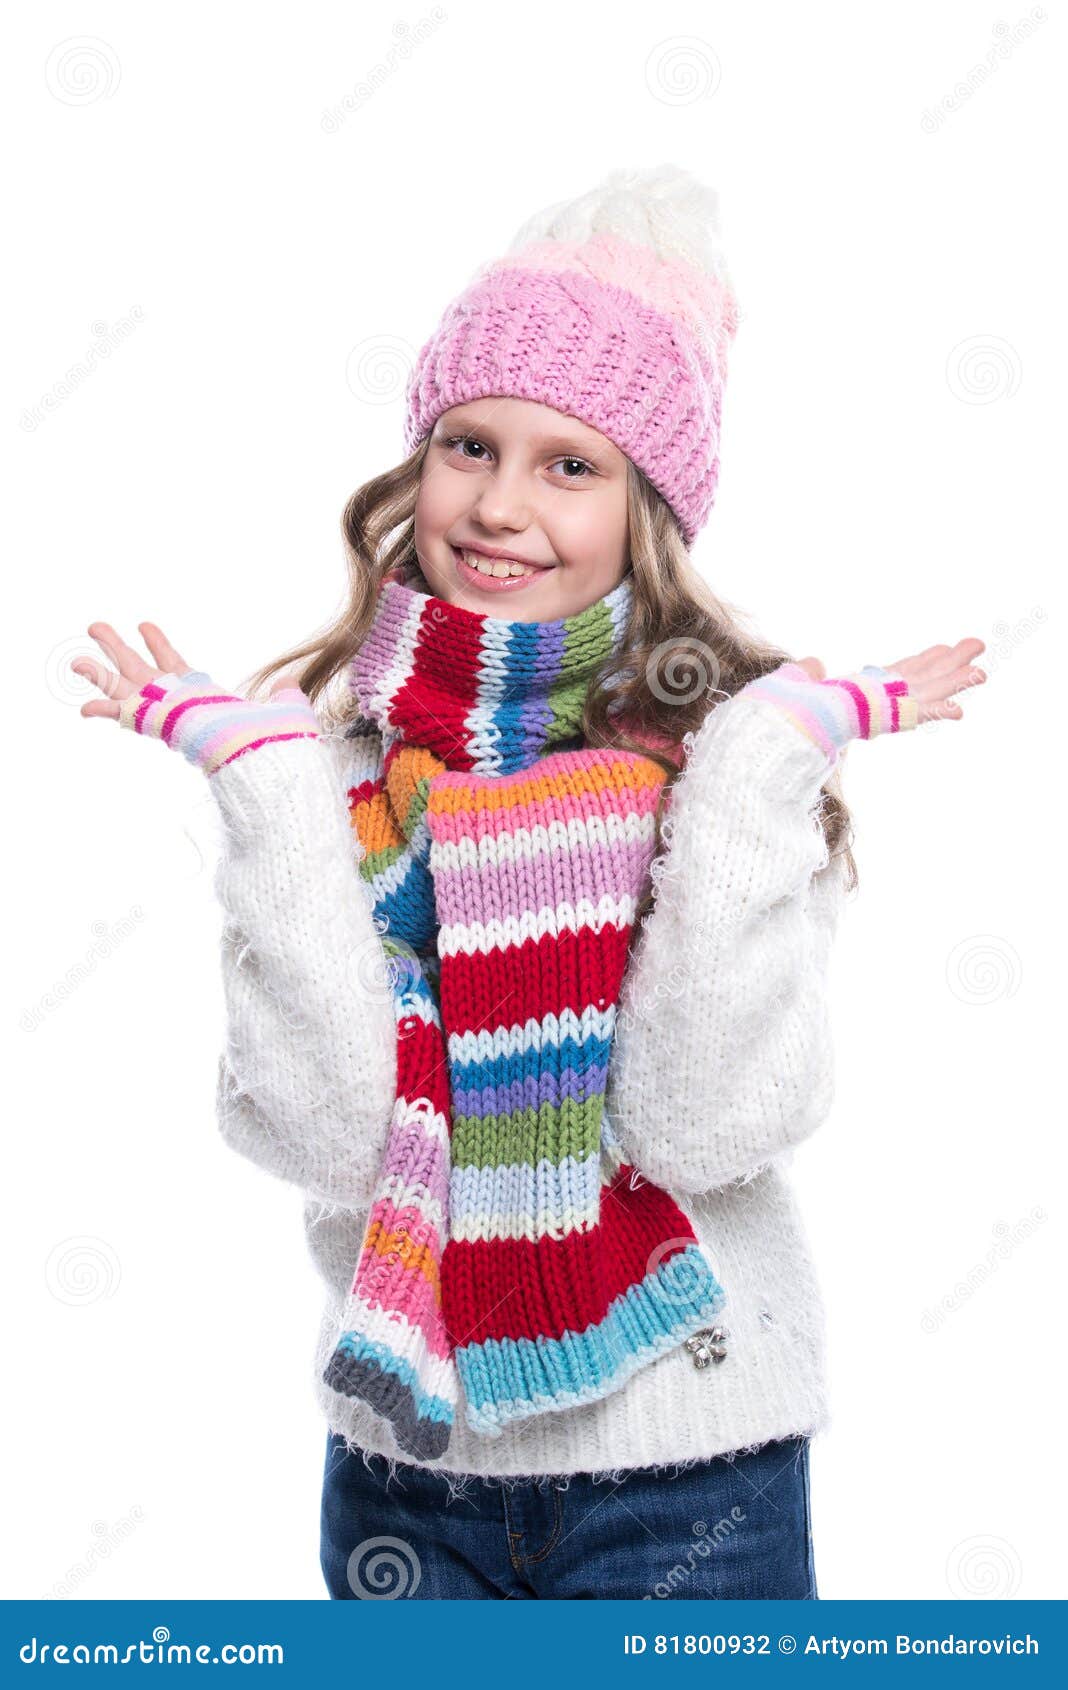 Smiling Cute Little Girl Wearing Knitted Sweater and Colorful Scarf ...